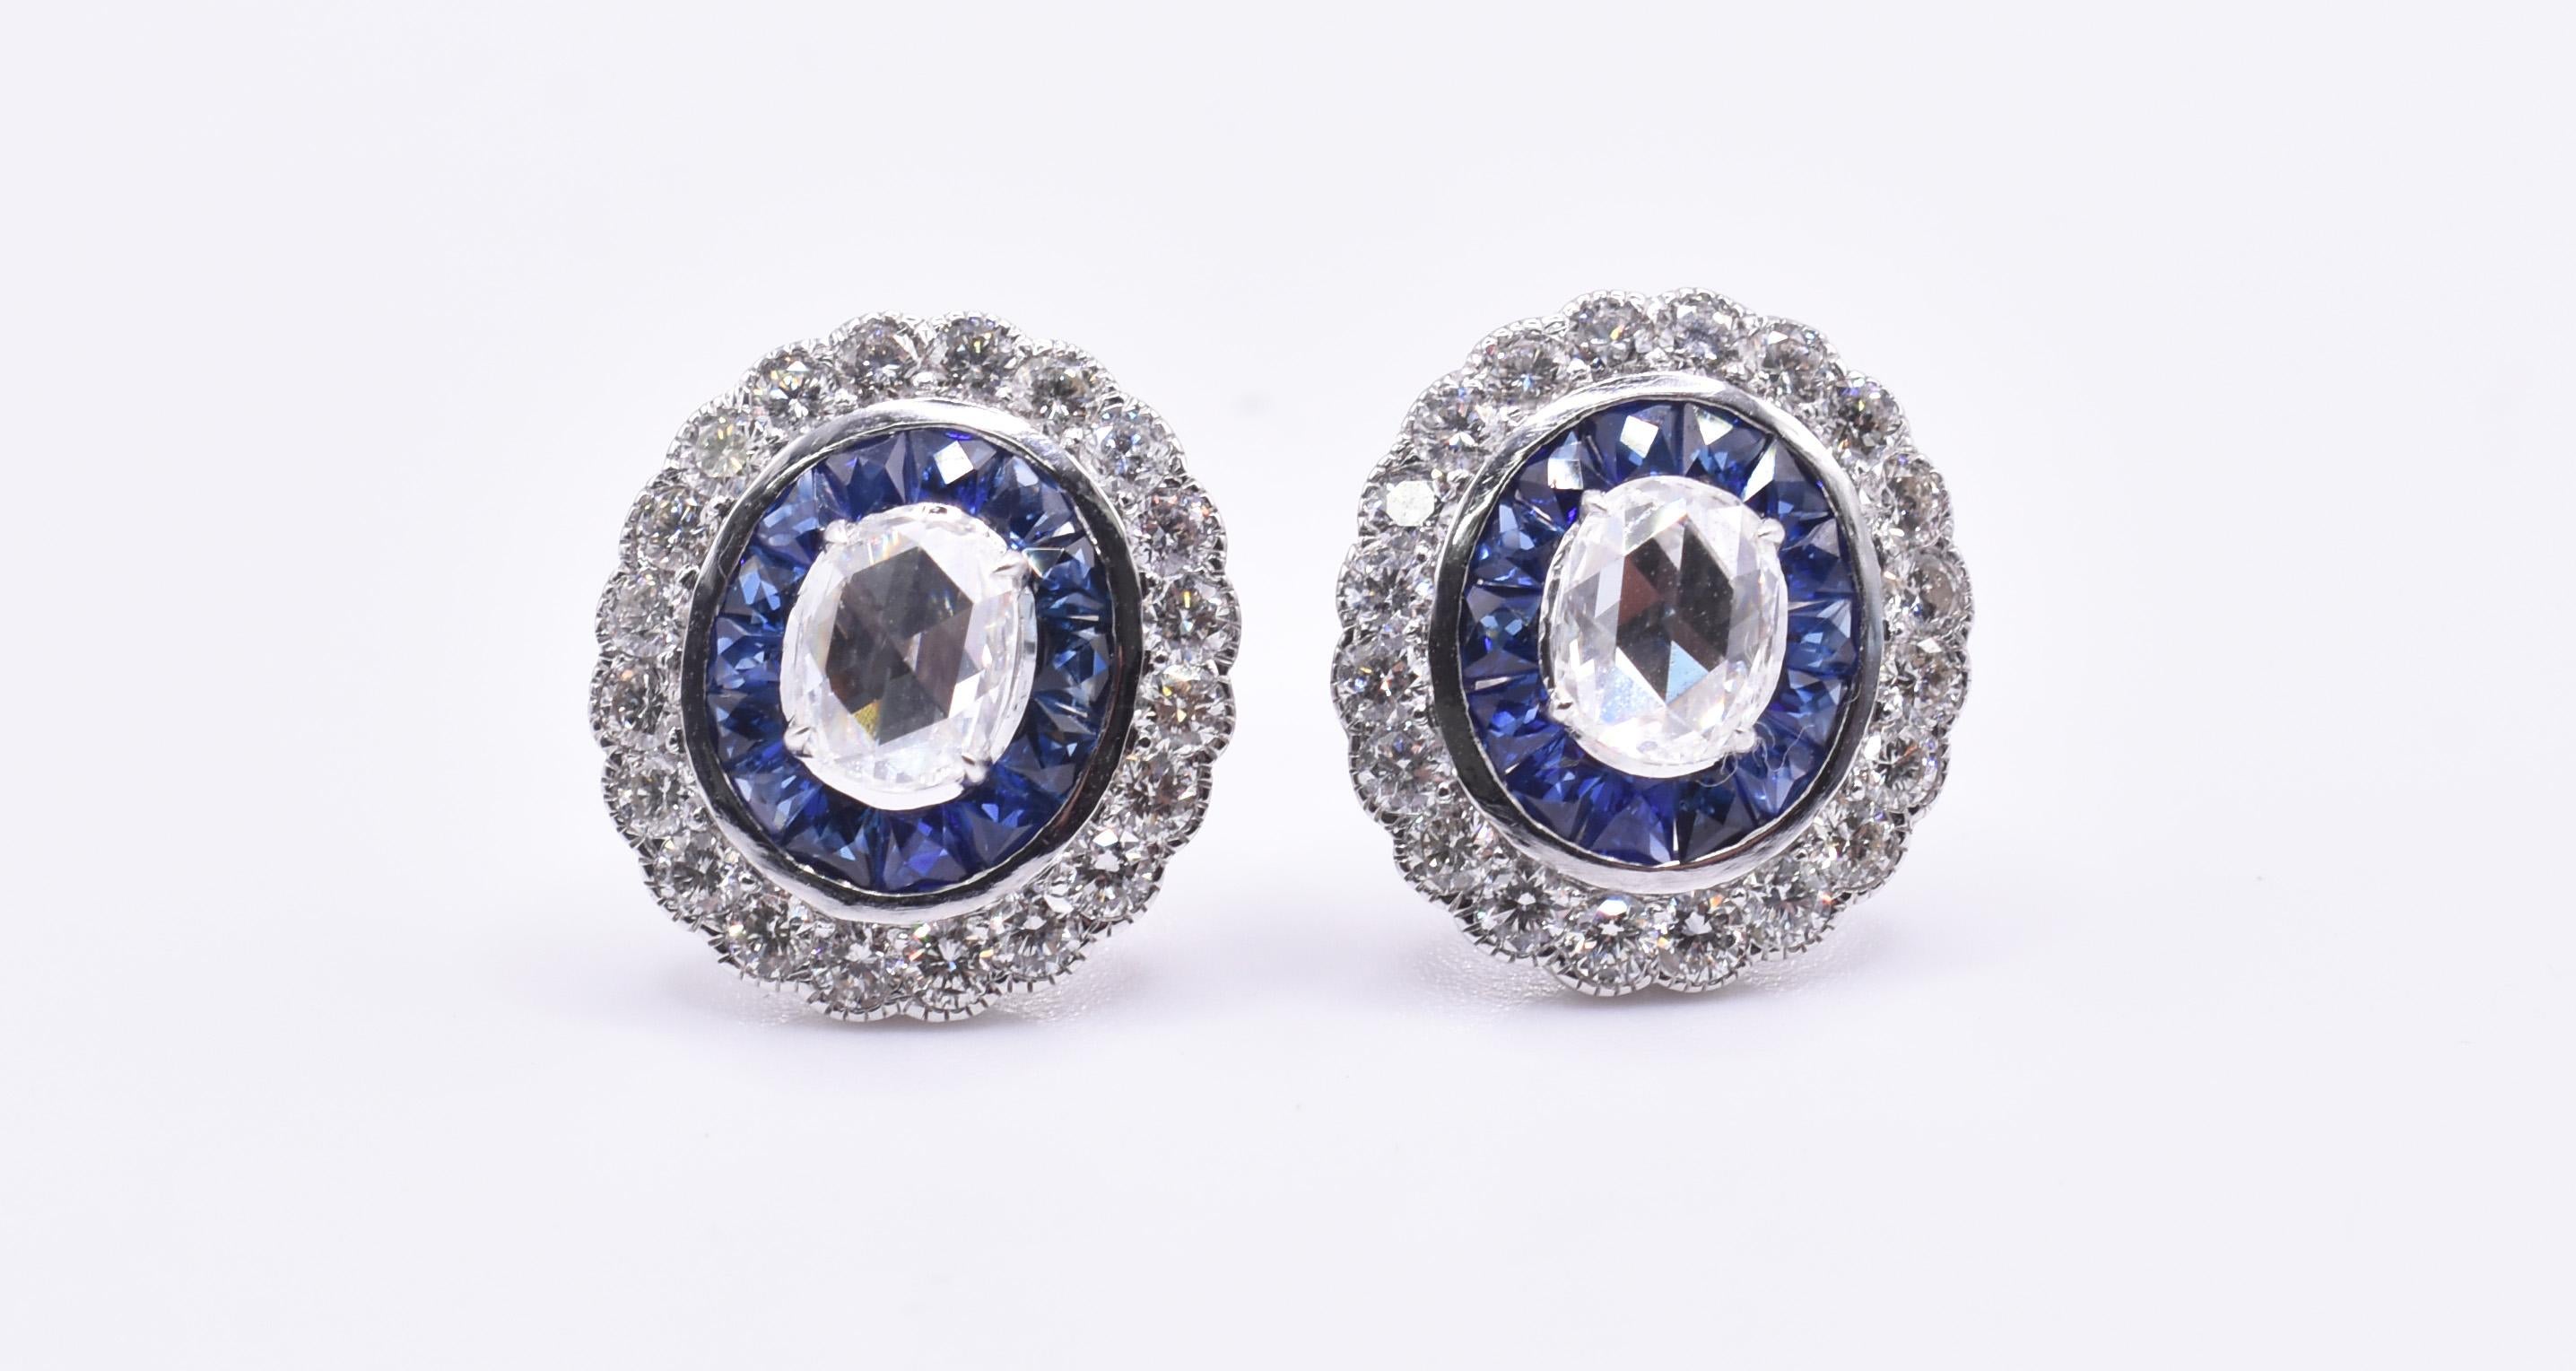 For sale is a good quality pair of 18k Art Deco style white gold diamond and sapphire stud earrings, featuring a stunning rose cut diamond to the centre of each earring, surrounded by a halo of 14 blue sapphires, with a further 20 round cut diamonds